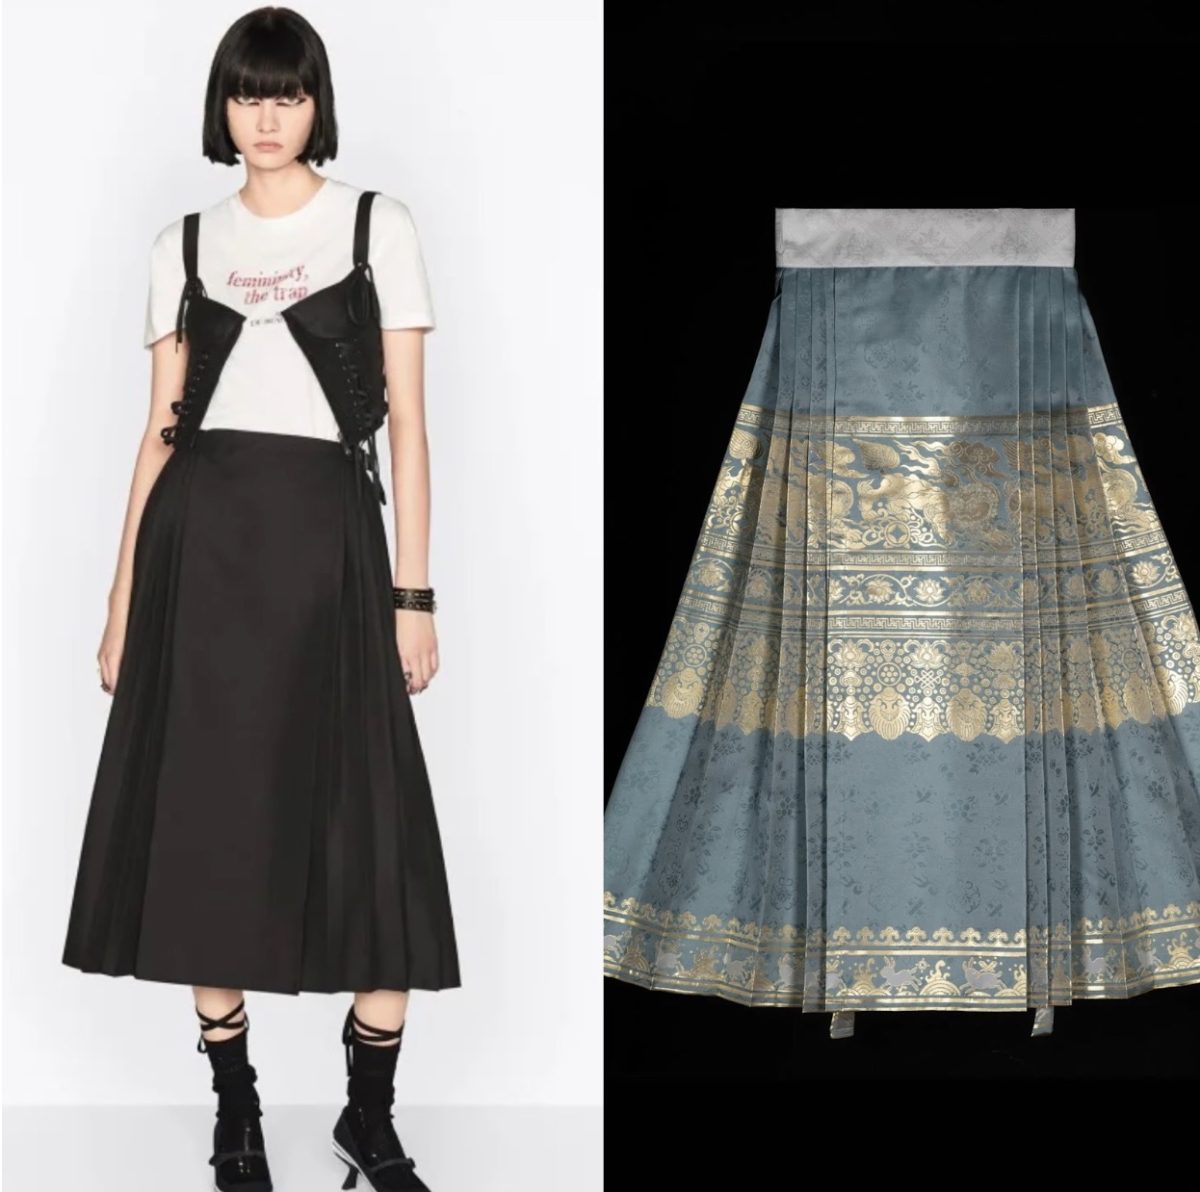 Dior’s skirt compared with the traditional Chinese MaMianQun with gold embroidery.